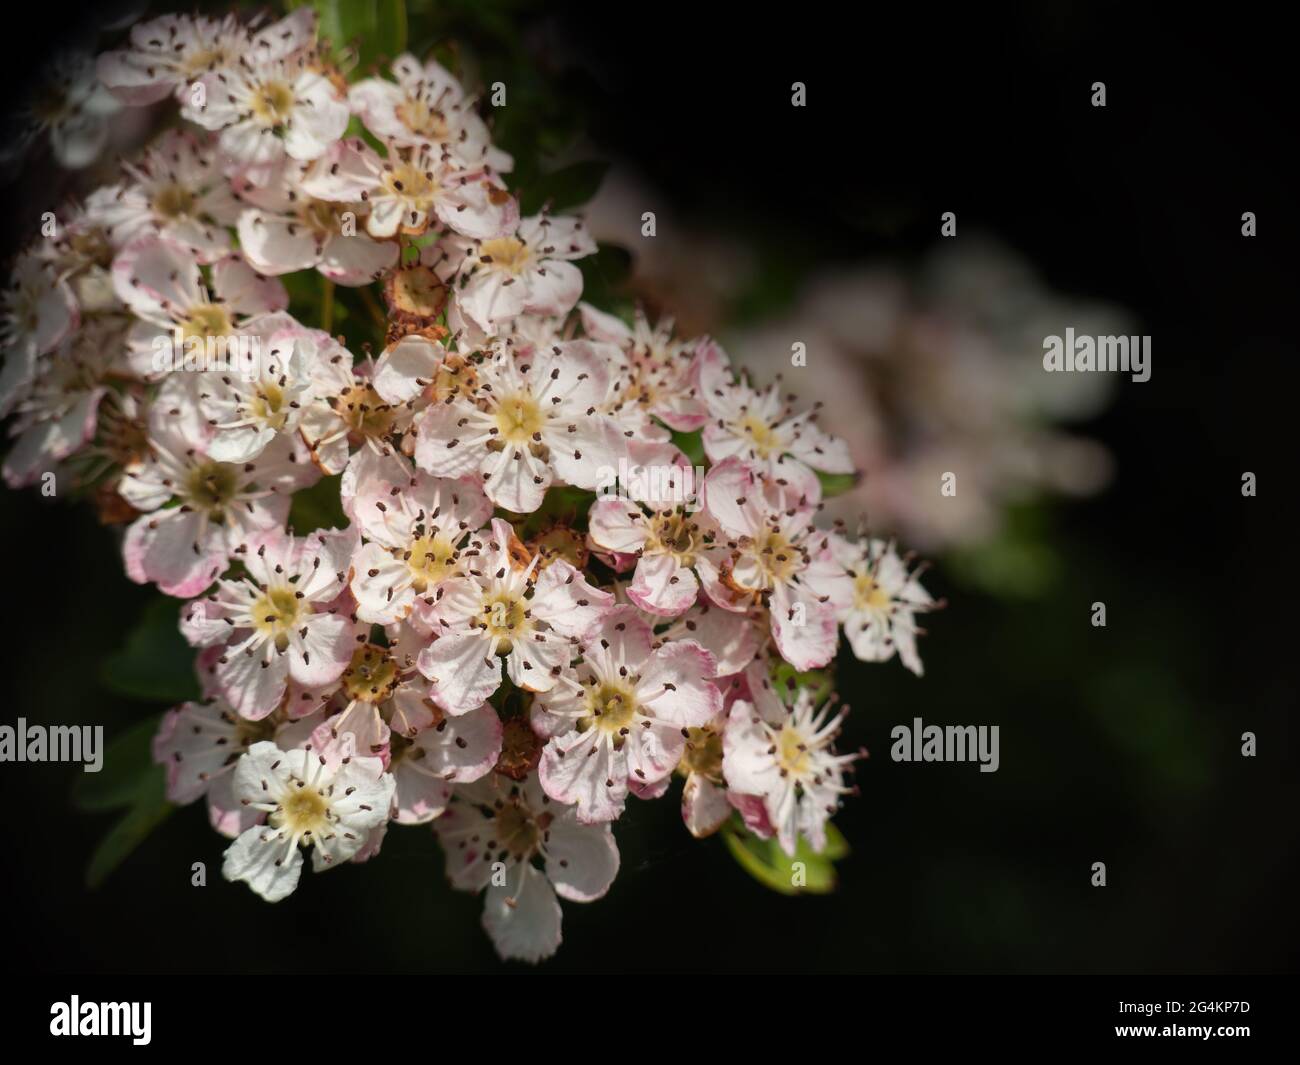 Fading pink white blossom on tree in sunshine, dark background with copyspace. Beautiful. Stock Photo